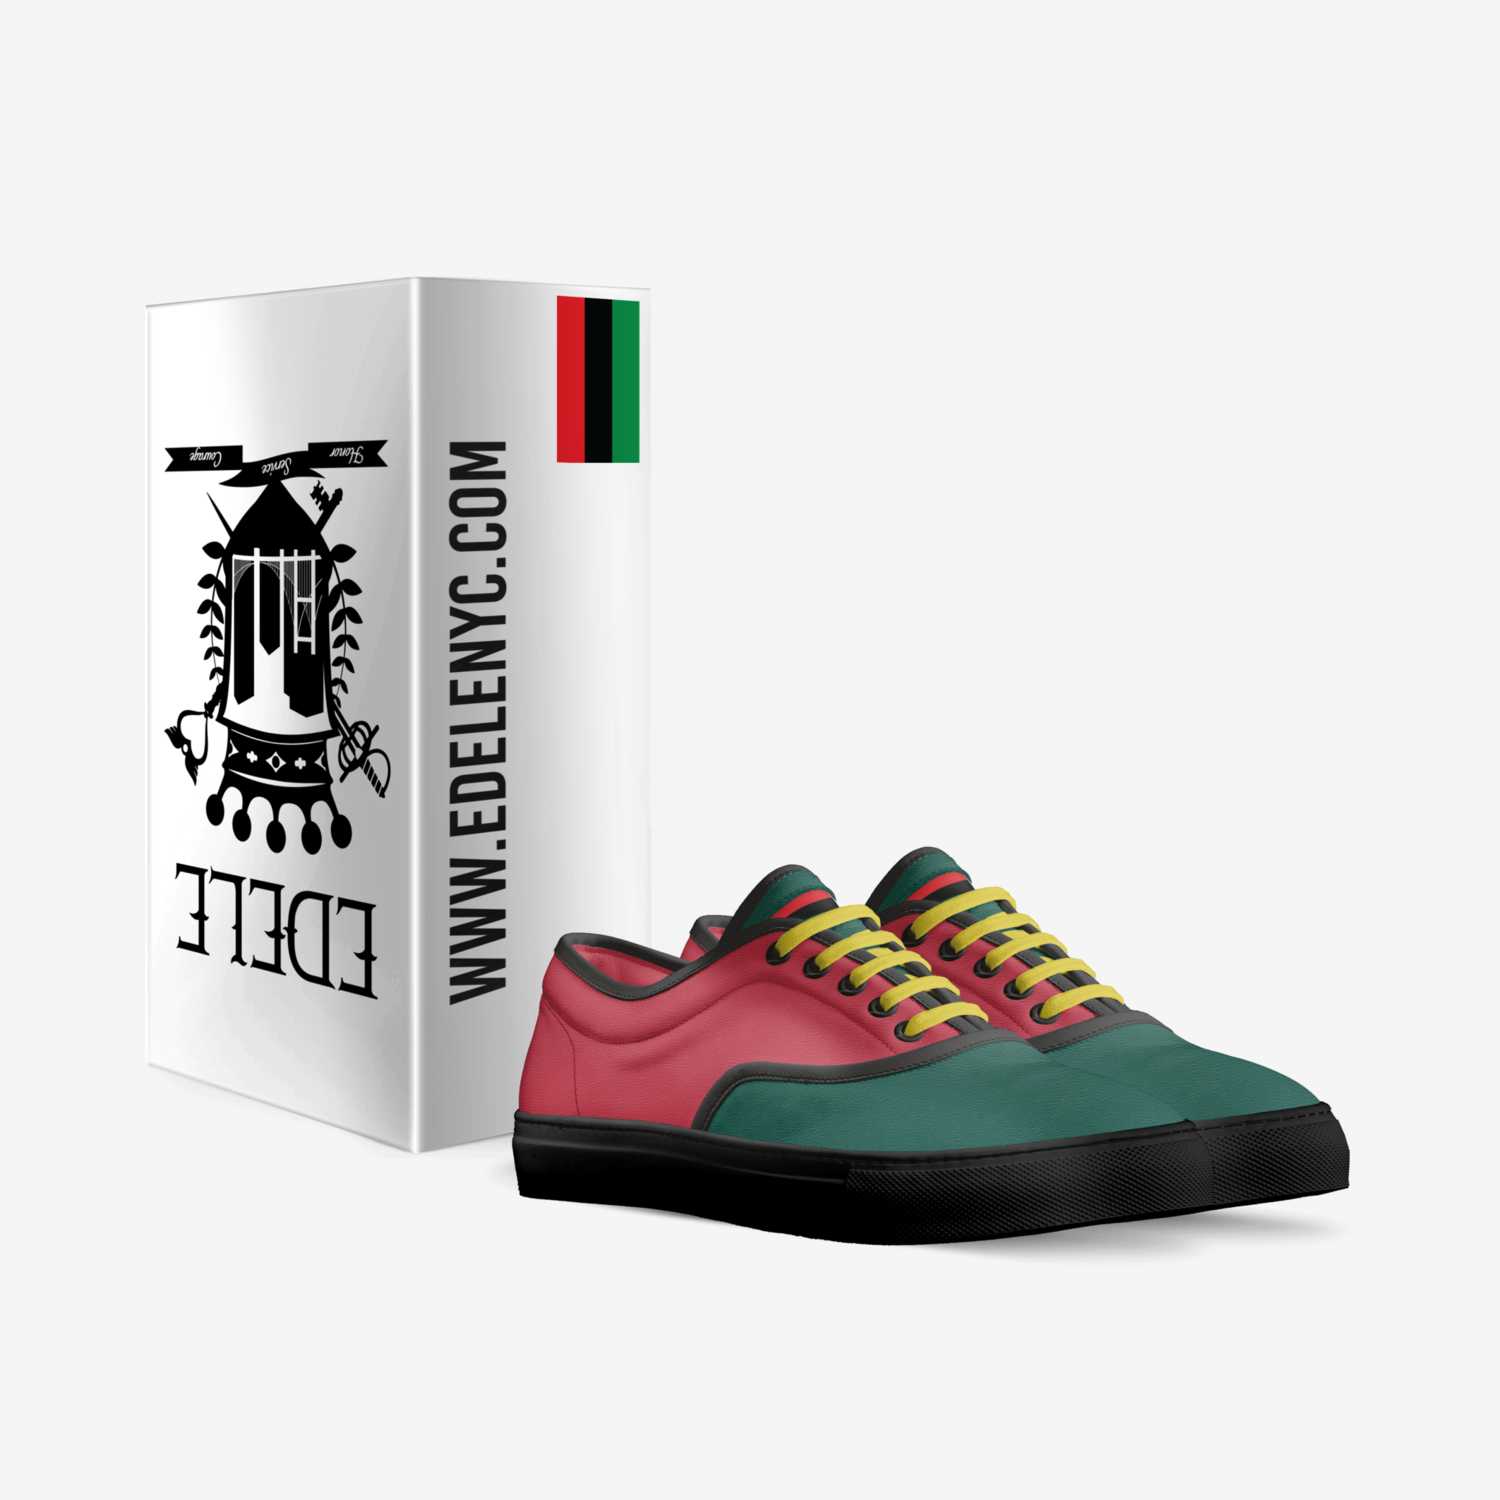 EDELE (Motherland) custom made in Italy shoes by Edele Rivers | Box view